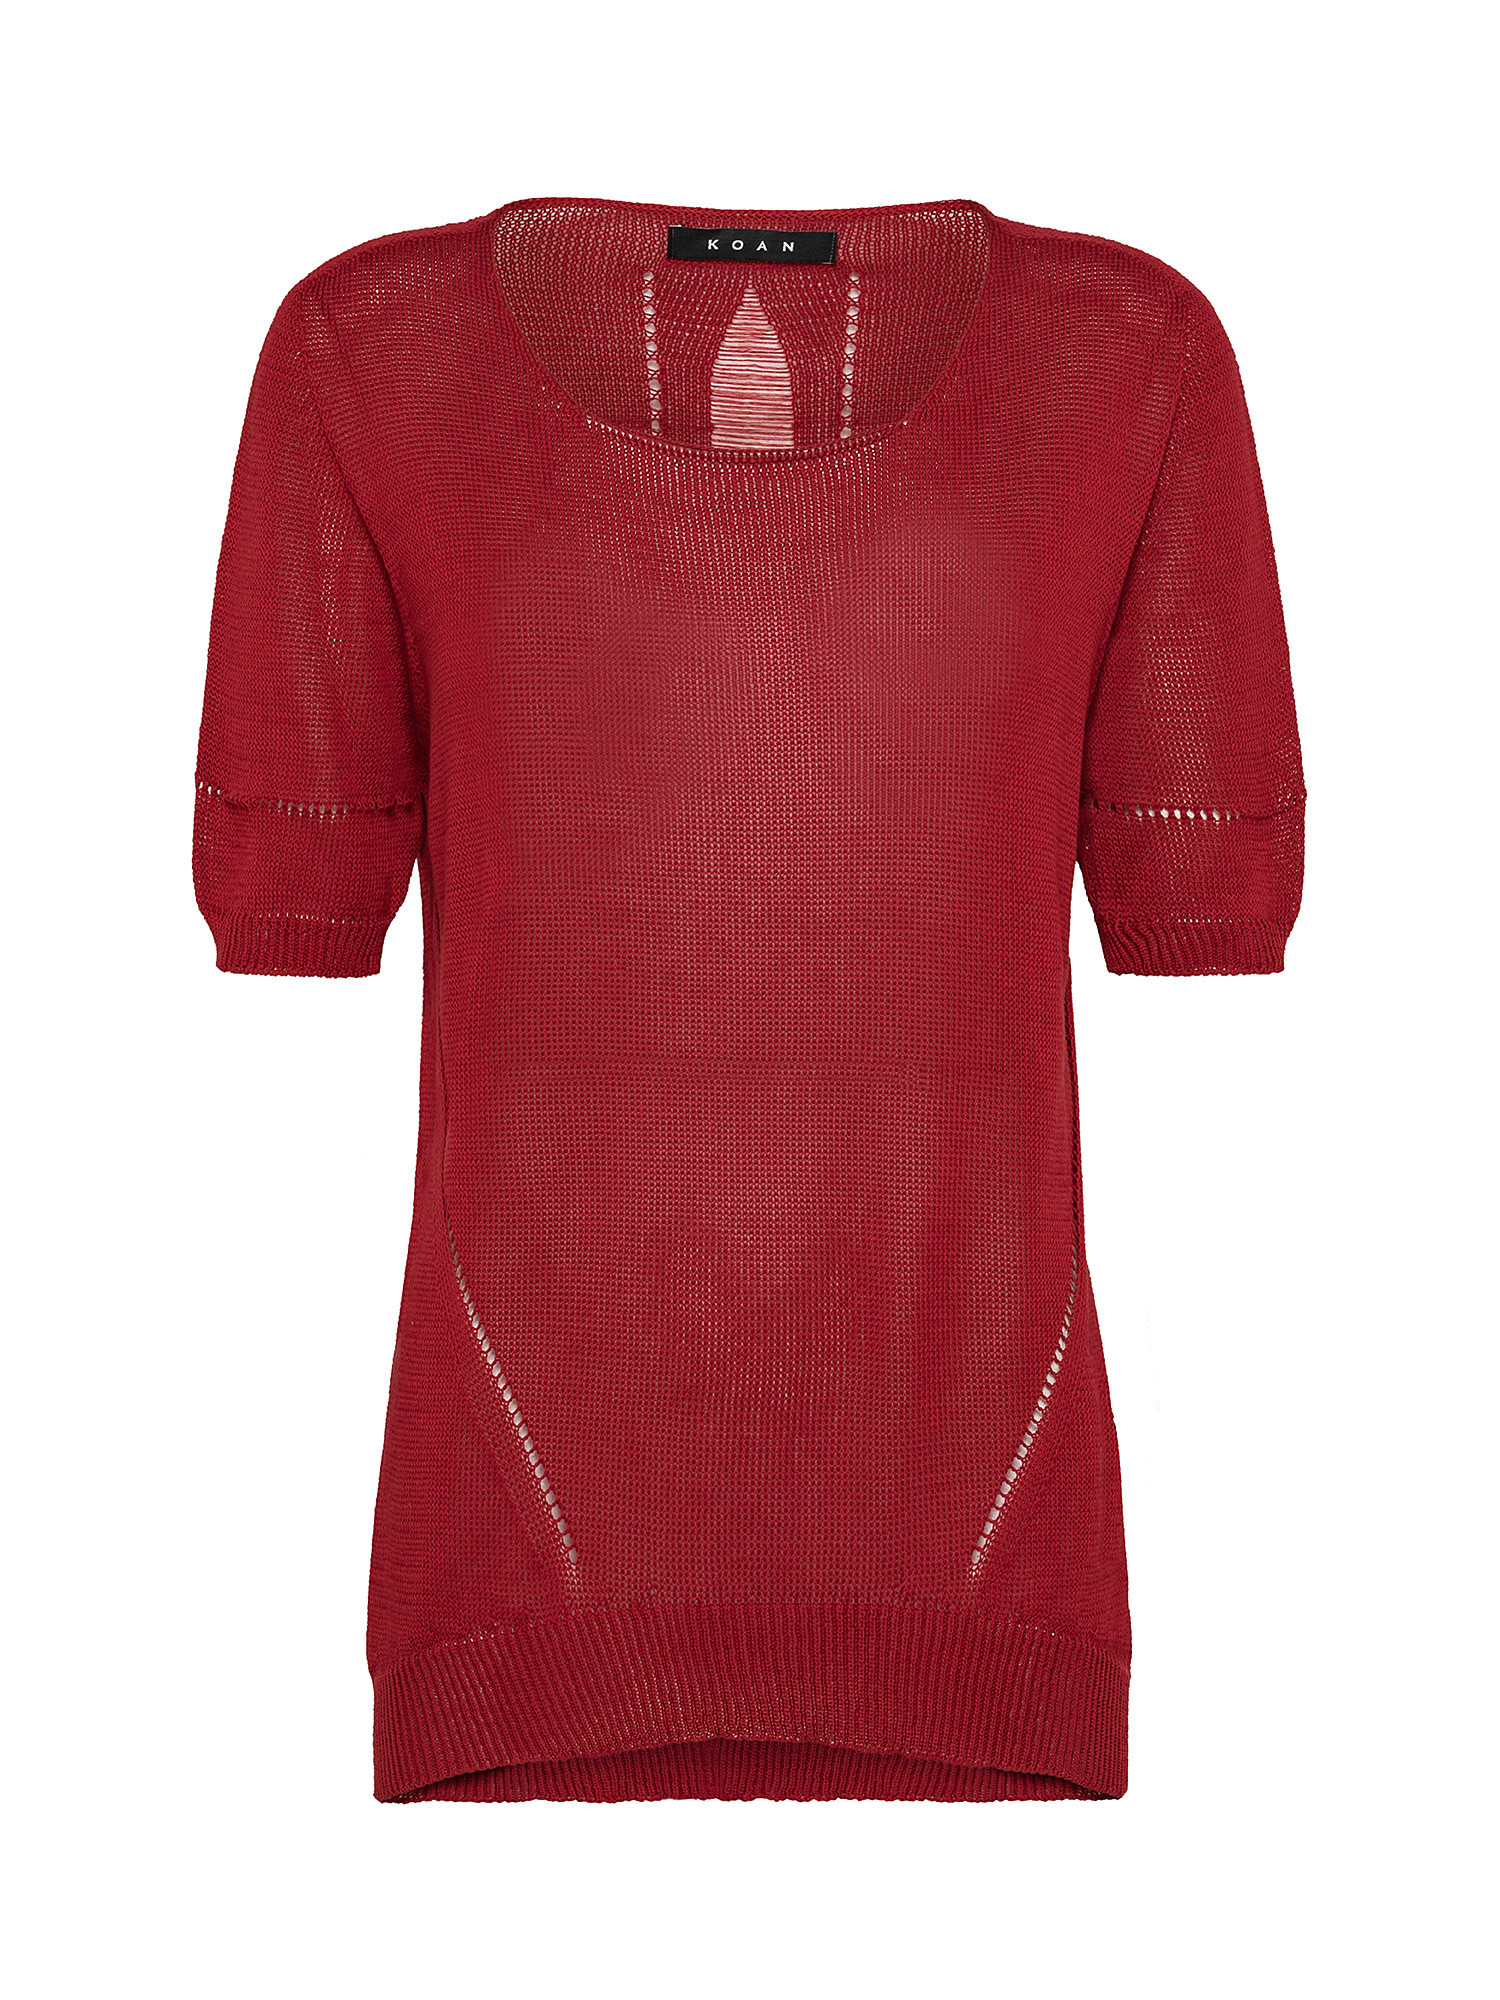 Maglia tricot, Rosso, large image number 0